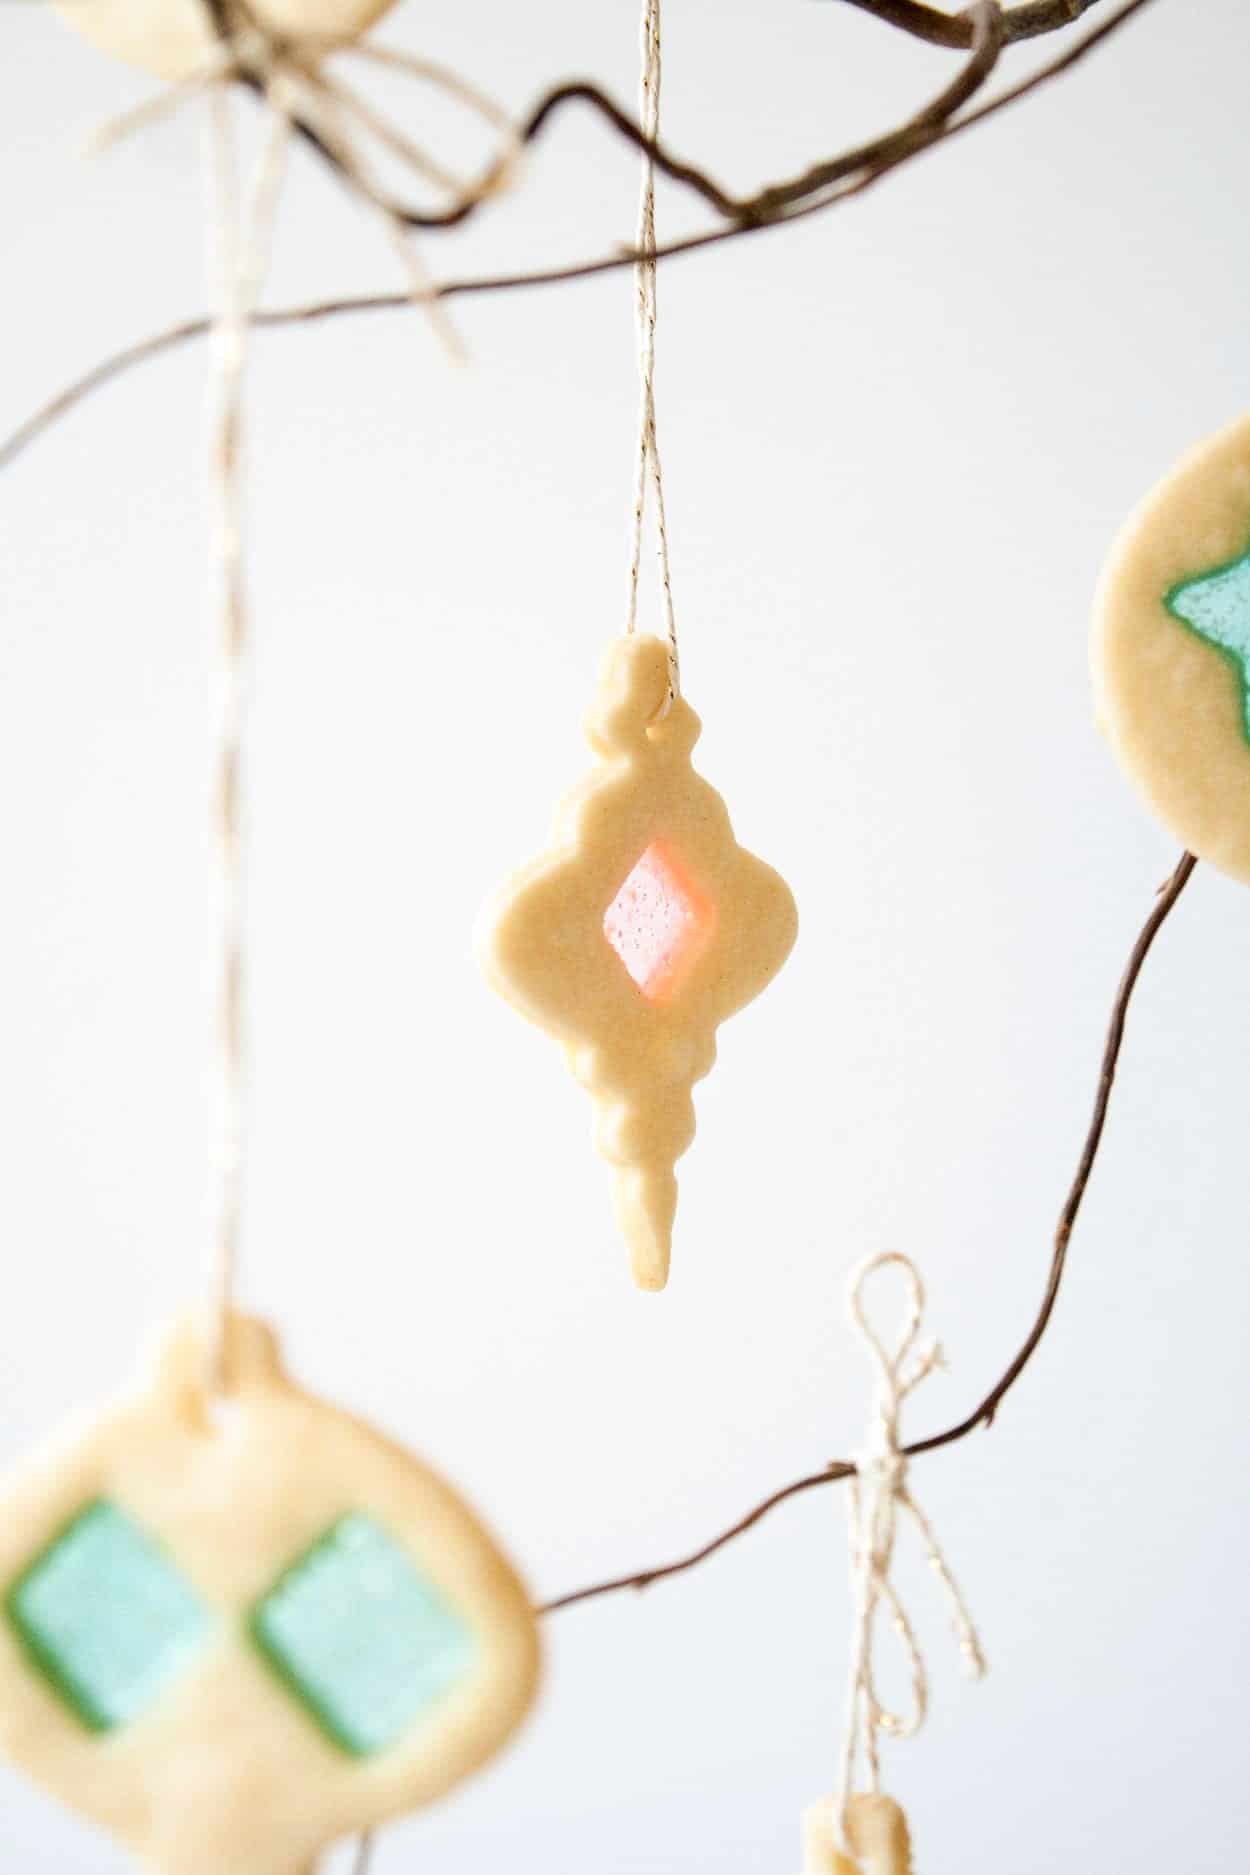 Close up of a stained glass cookie hanging from a branch.